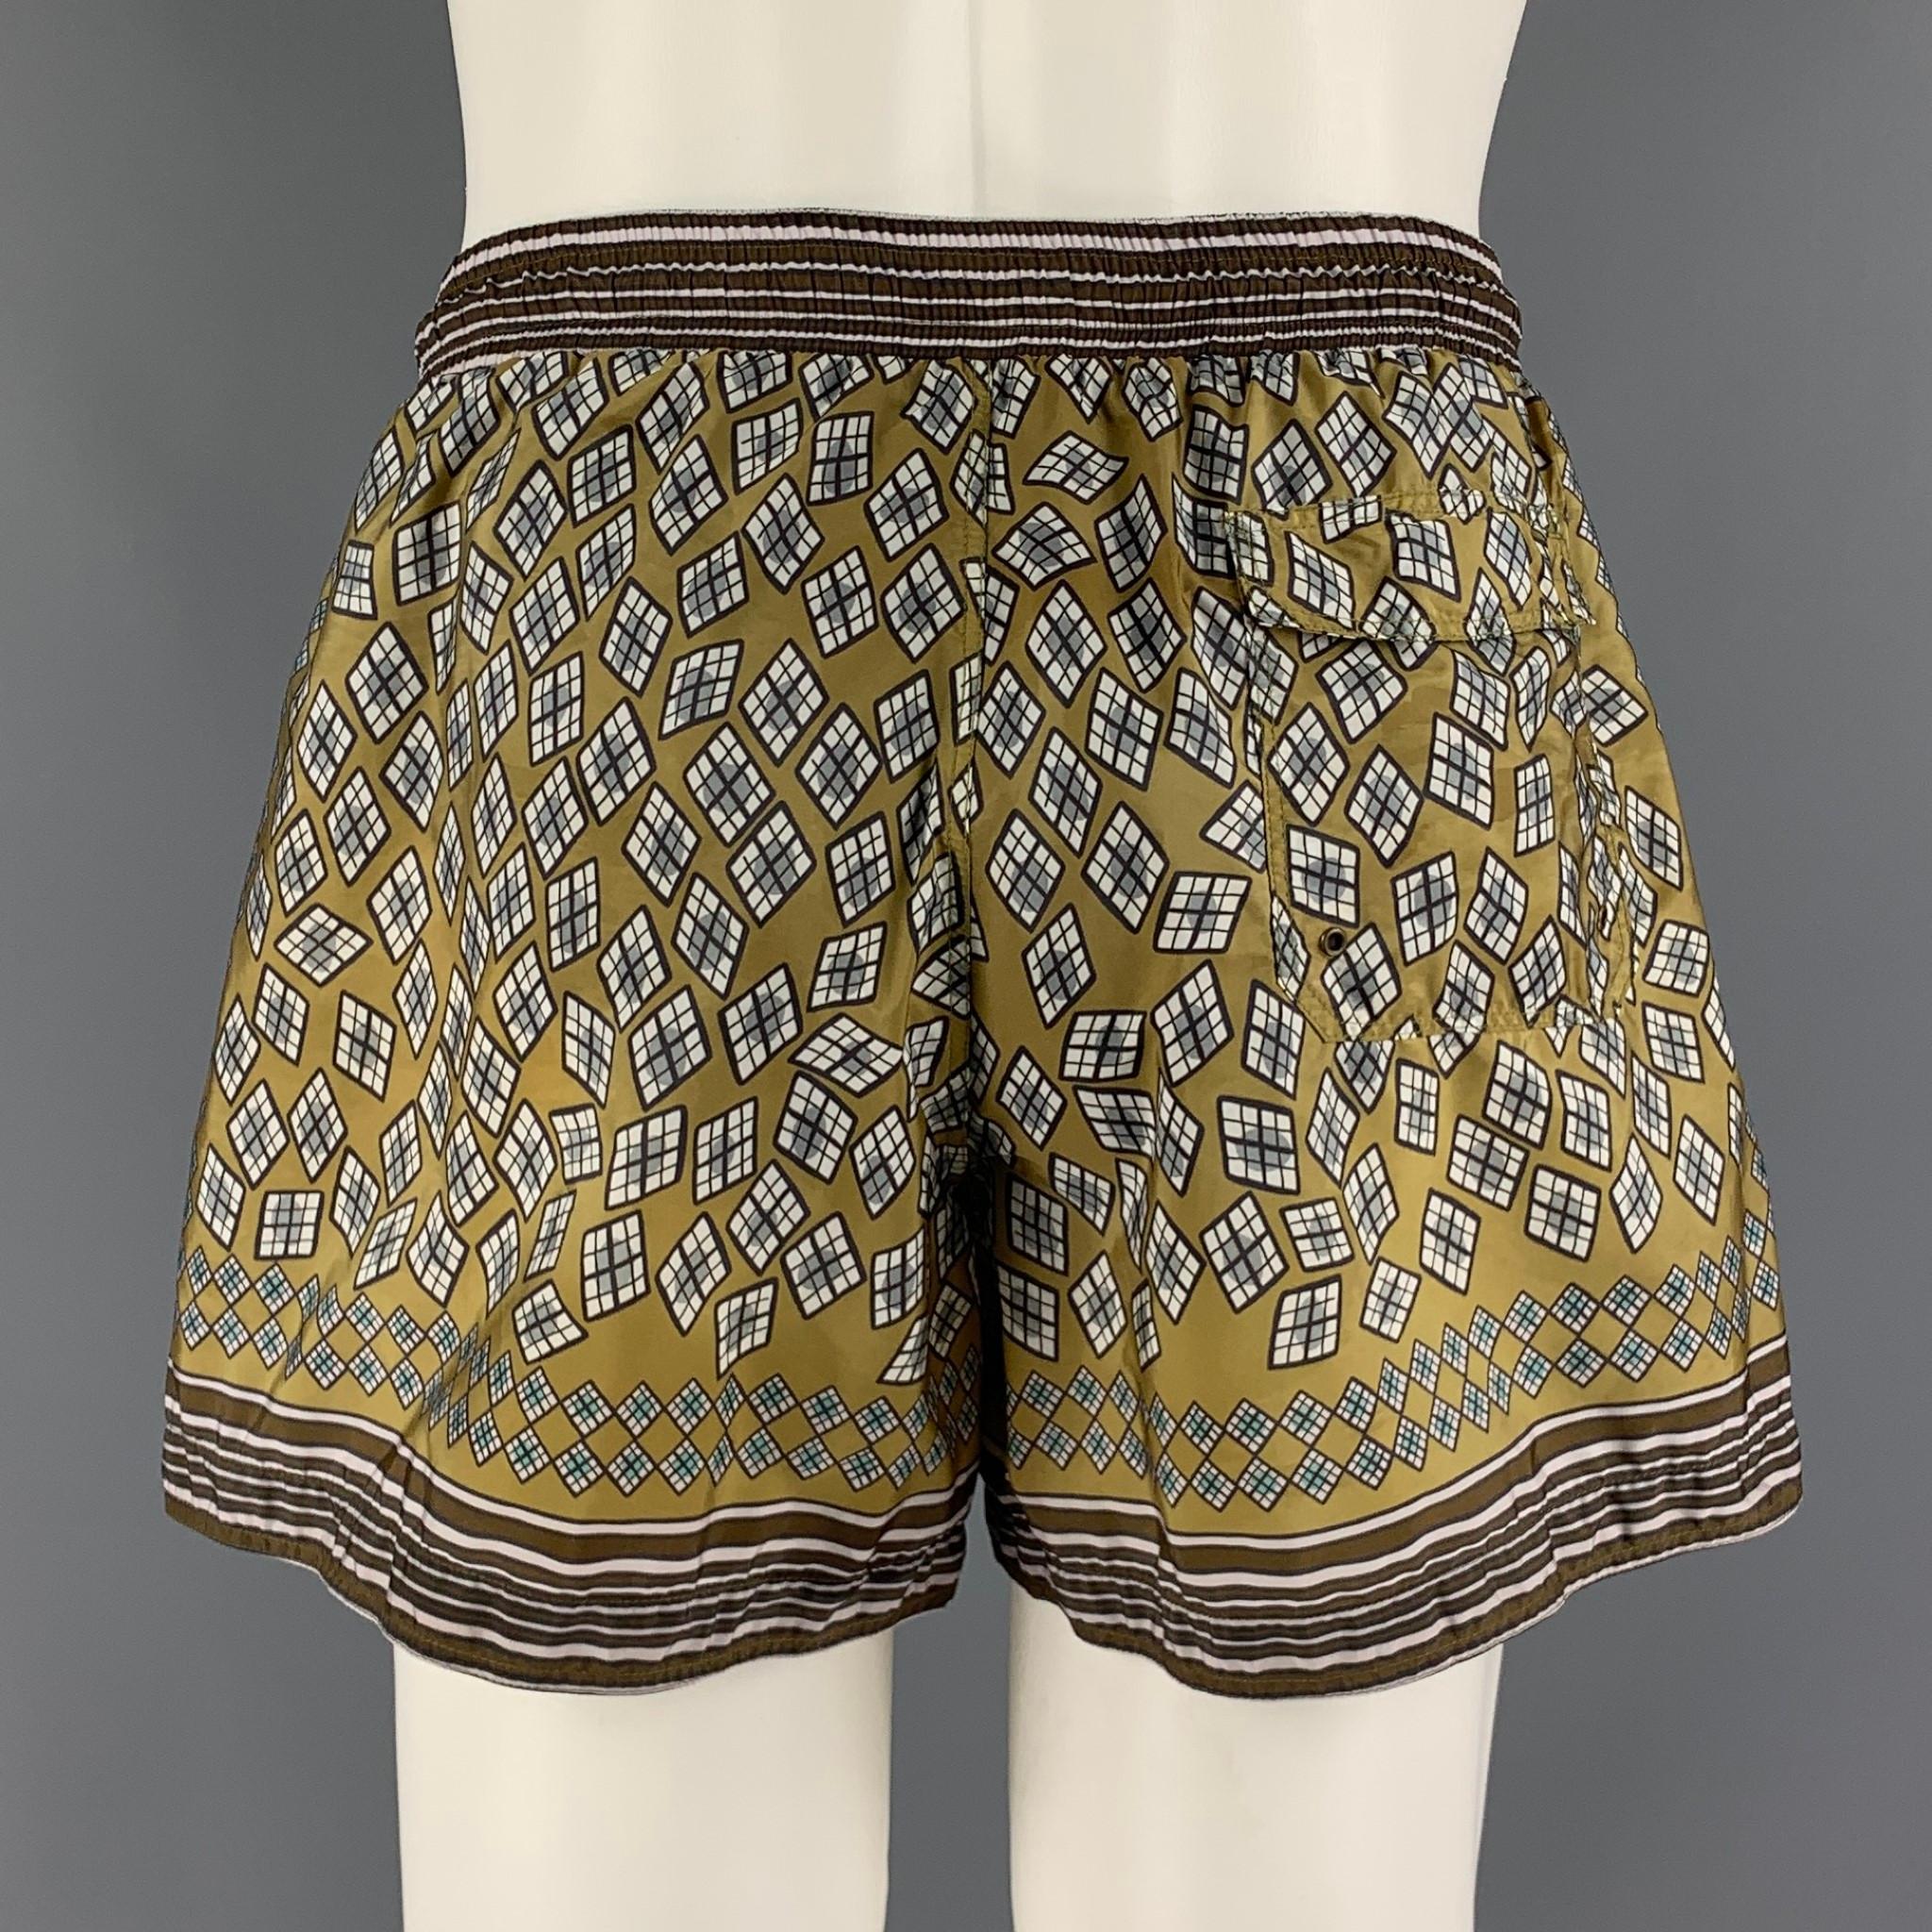 Burberry Prorsum Spring 2013 Swim Shorts / Trunks by Christopher Bailey. Drawstring waist, net mesh lining, internal pouch. Geometric pattern of Olive and Brown hues, suggests a throwback to the pallid tones and impressionistic patterns of the